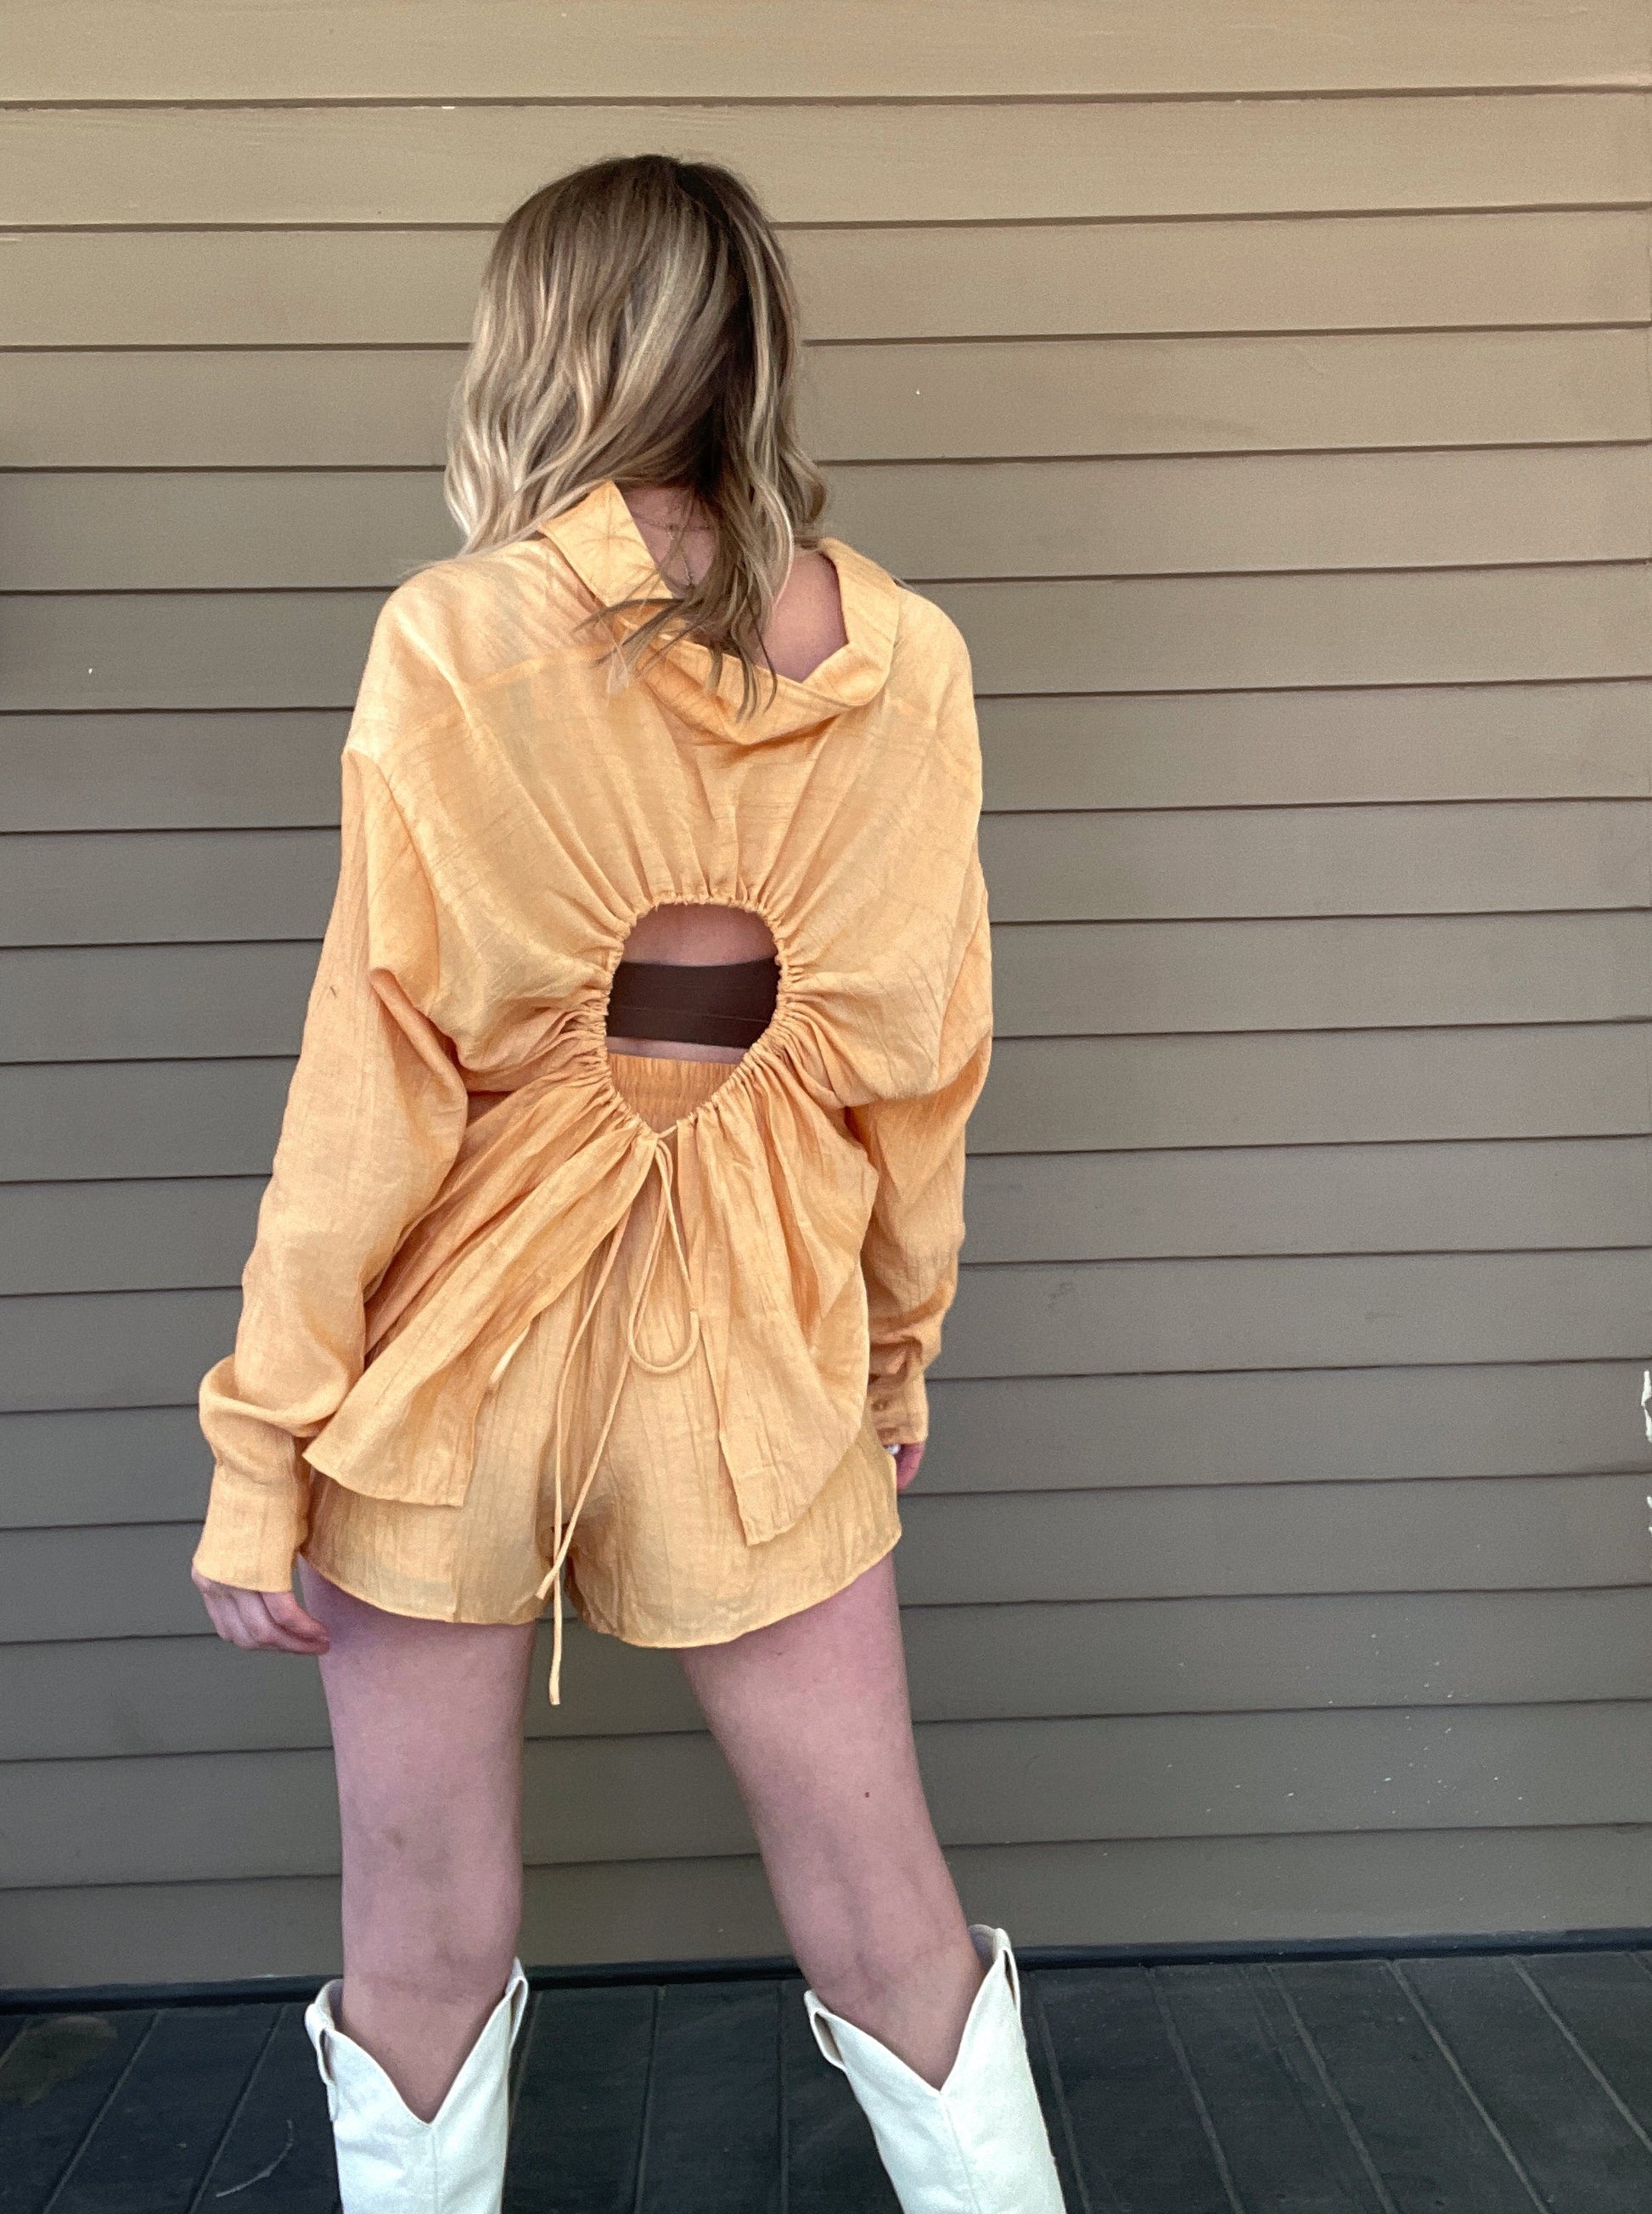 Clementine Crush Set  Shirt and shorts set Cut out back shirt Button up top Draw string shorts Pockets 82% Rayon, 18% Nylon Color: Tangerine